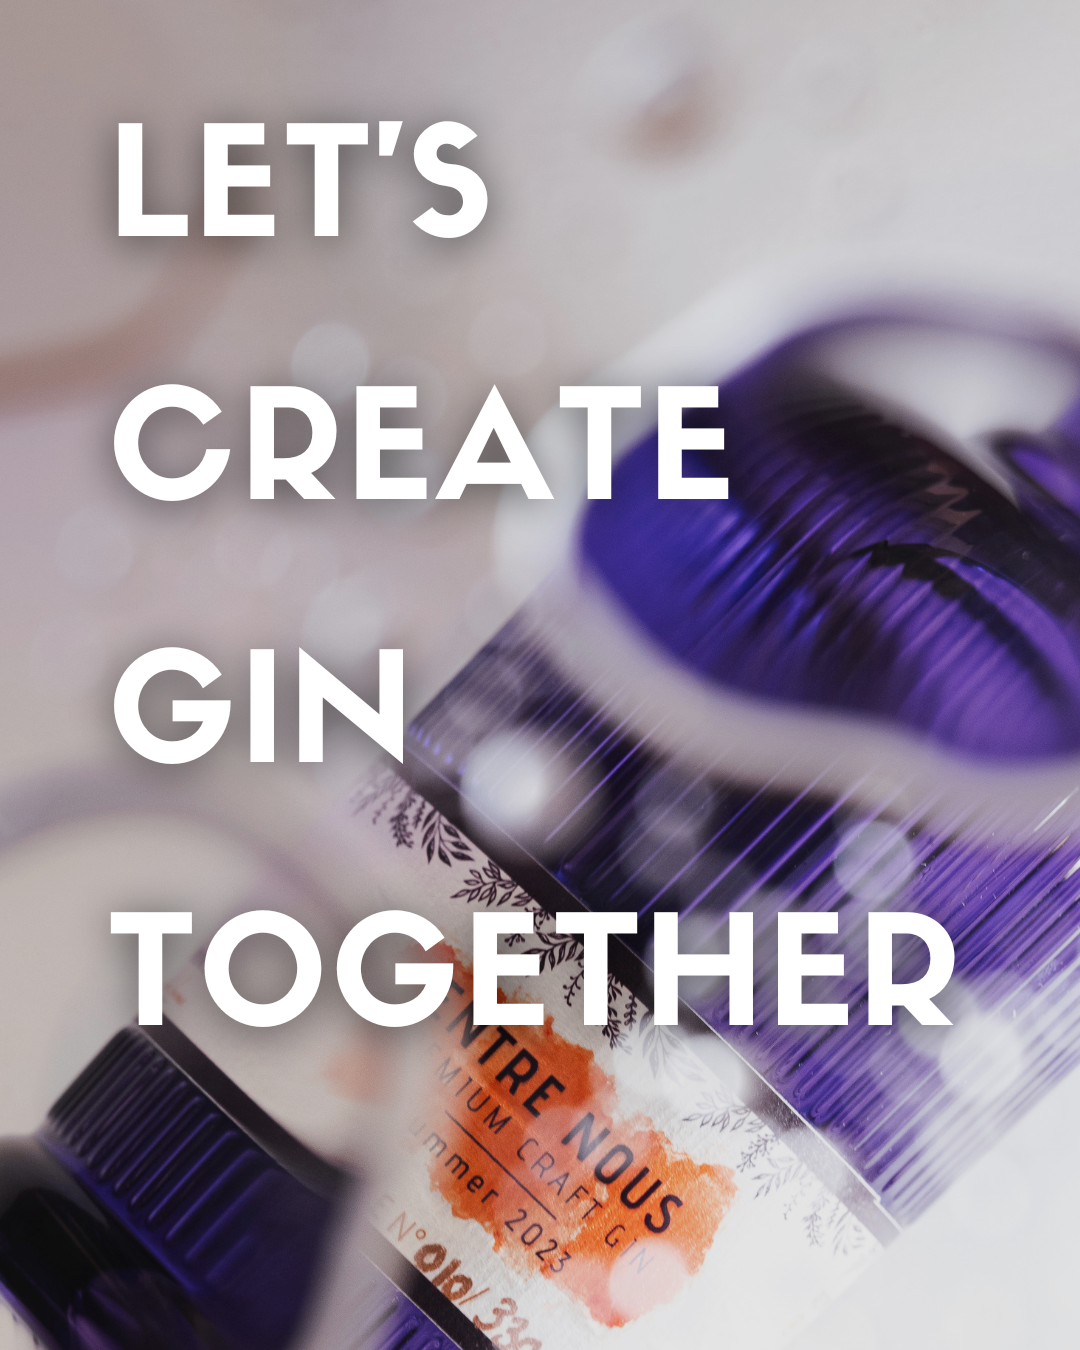 Let's create Gin together !